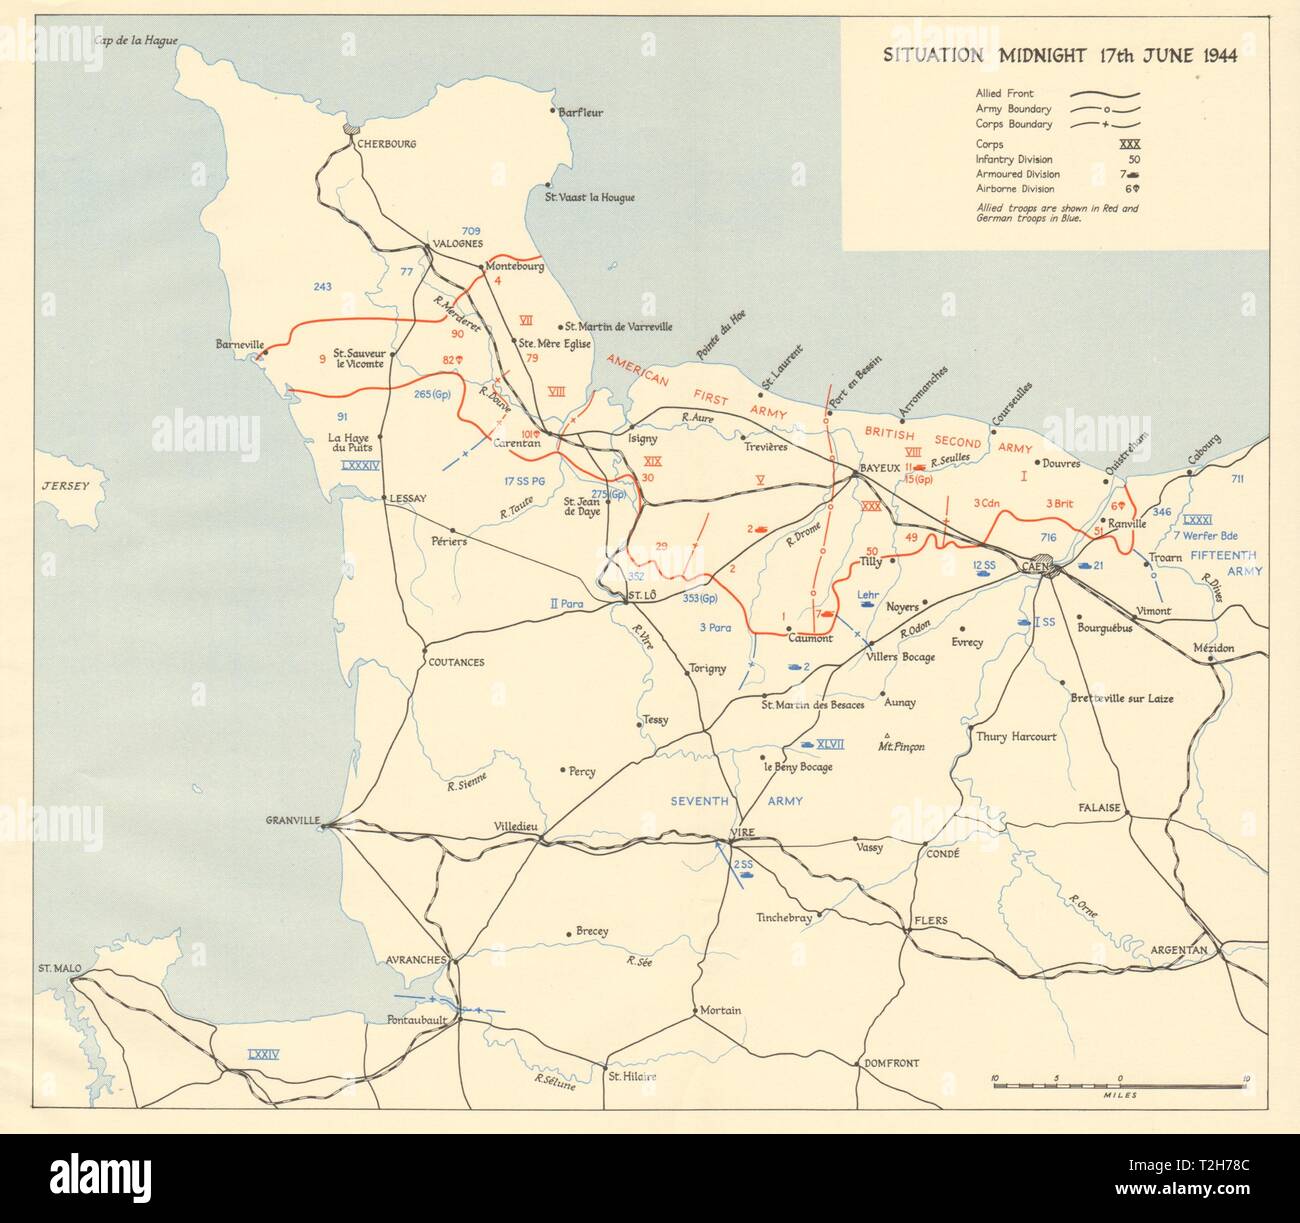 Operation Overlord. Normandy landings. Situation midnight 17 June 1944 1962 map Stock Photo